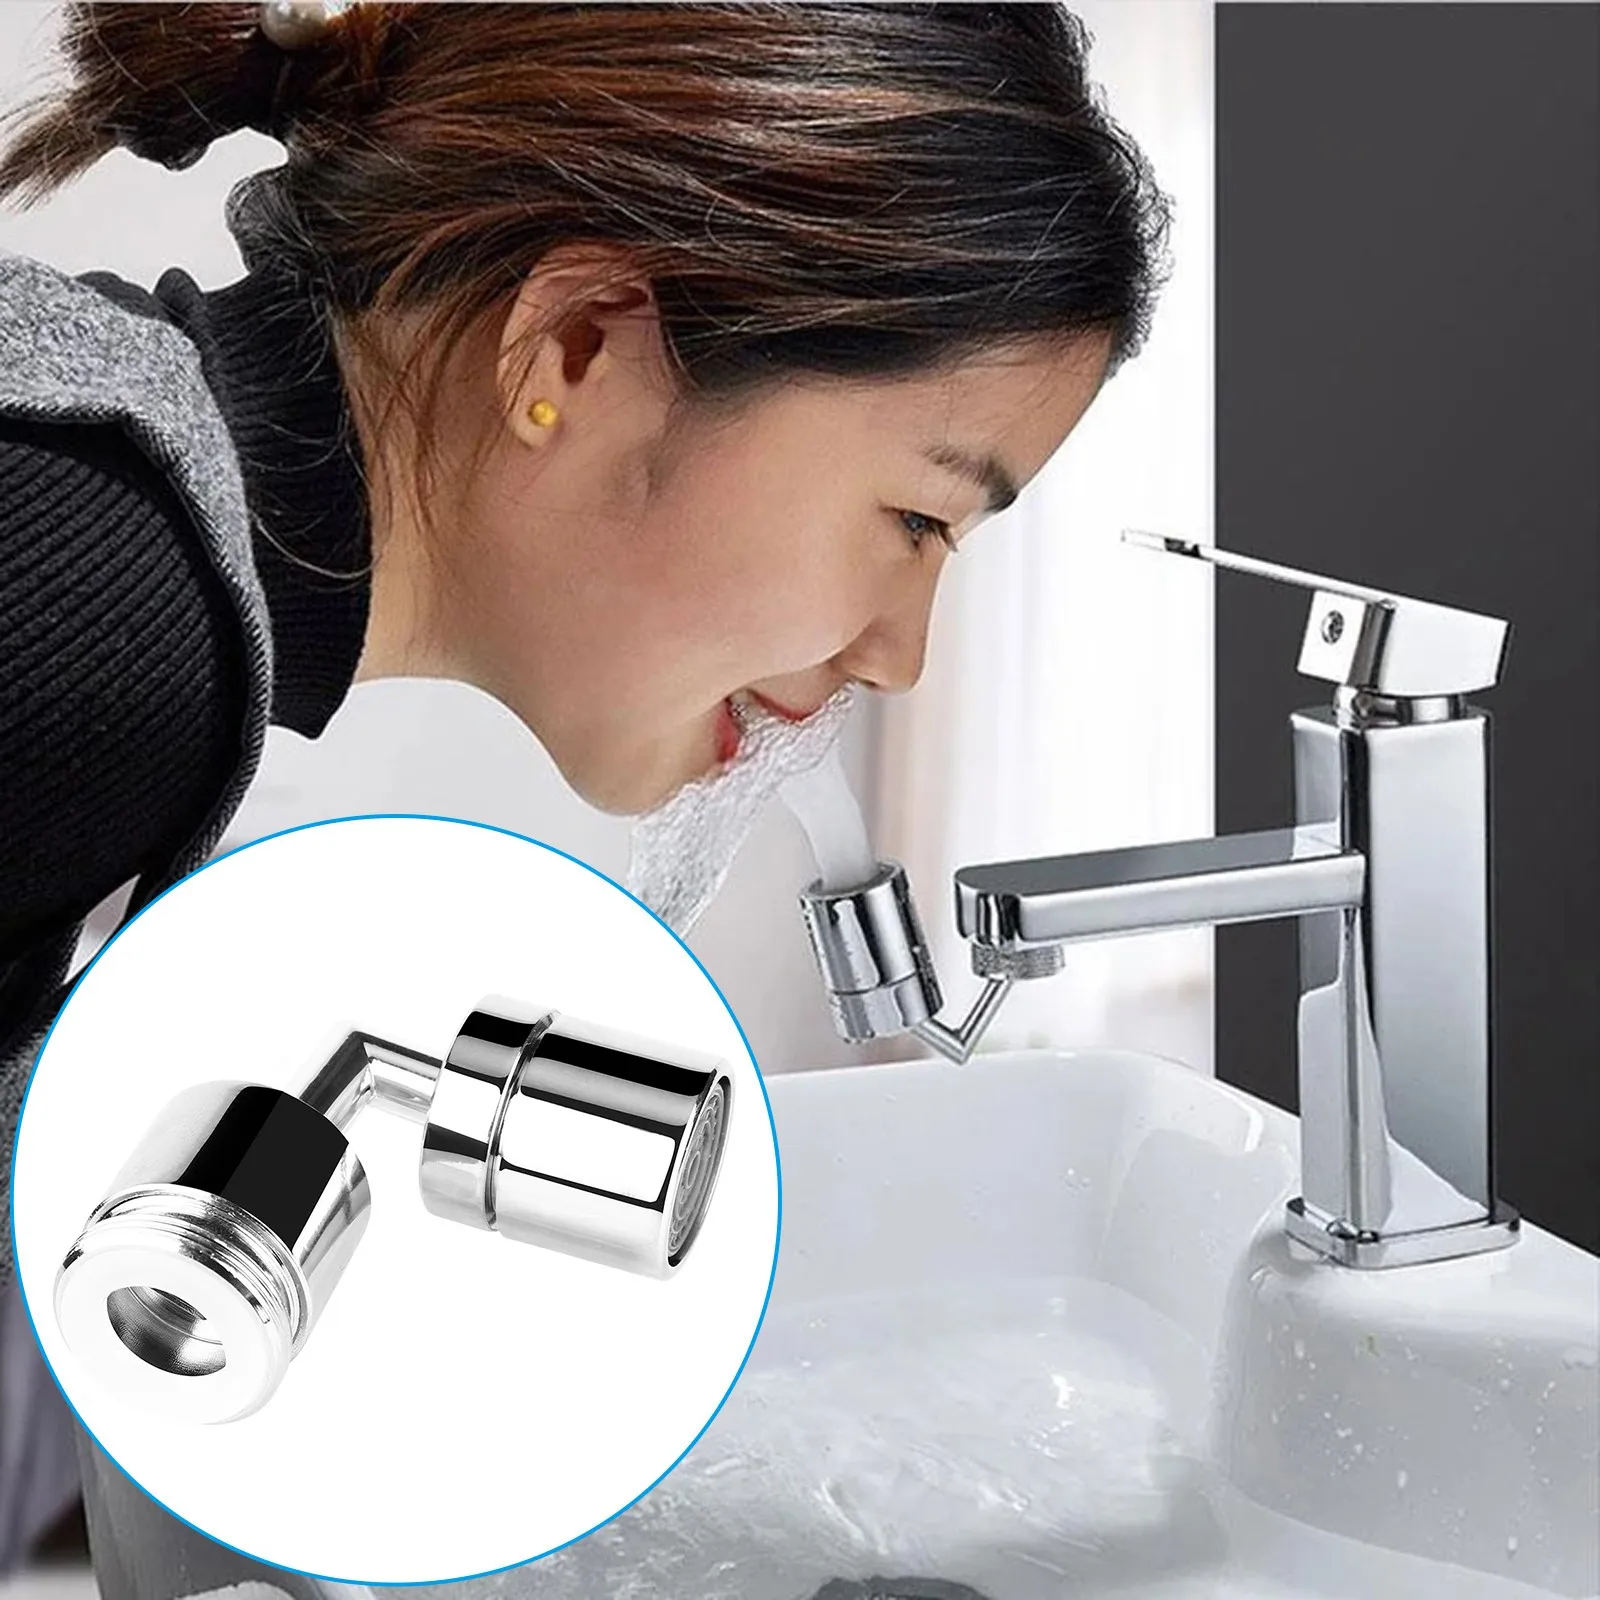 

720 degree faucet head Tap Aerator 720°Rotation Universal Splash-Proof Swivel Water Saving Faucet For Bathroom embout robinet c1